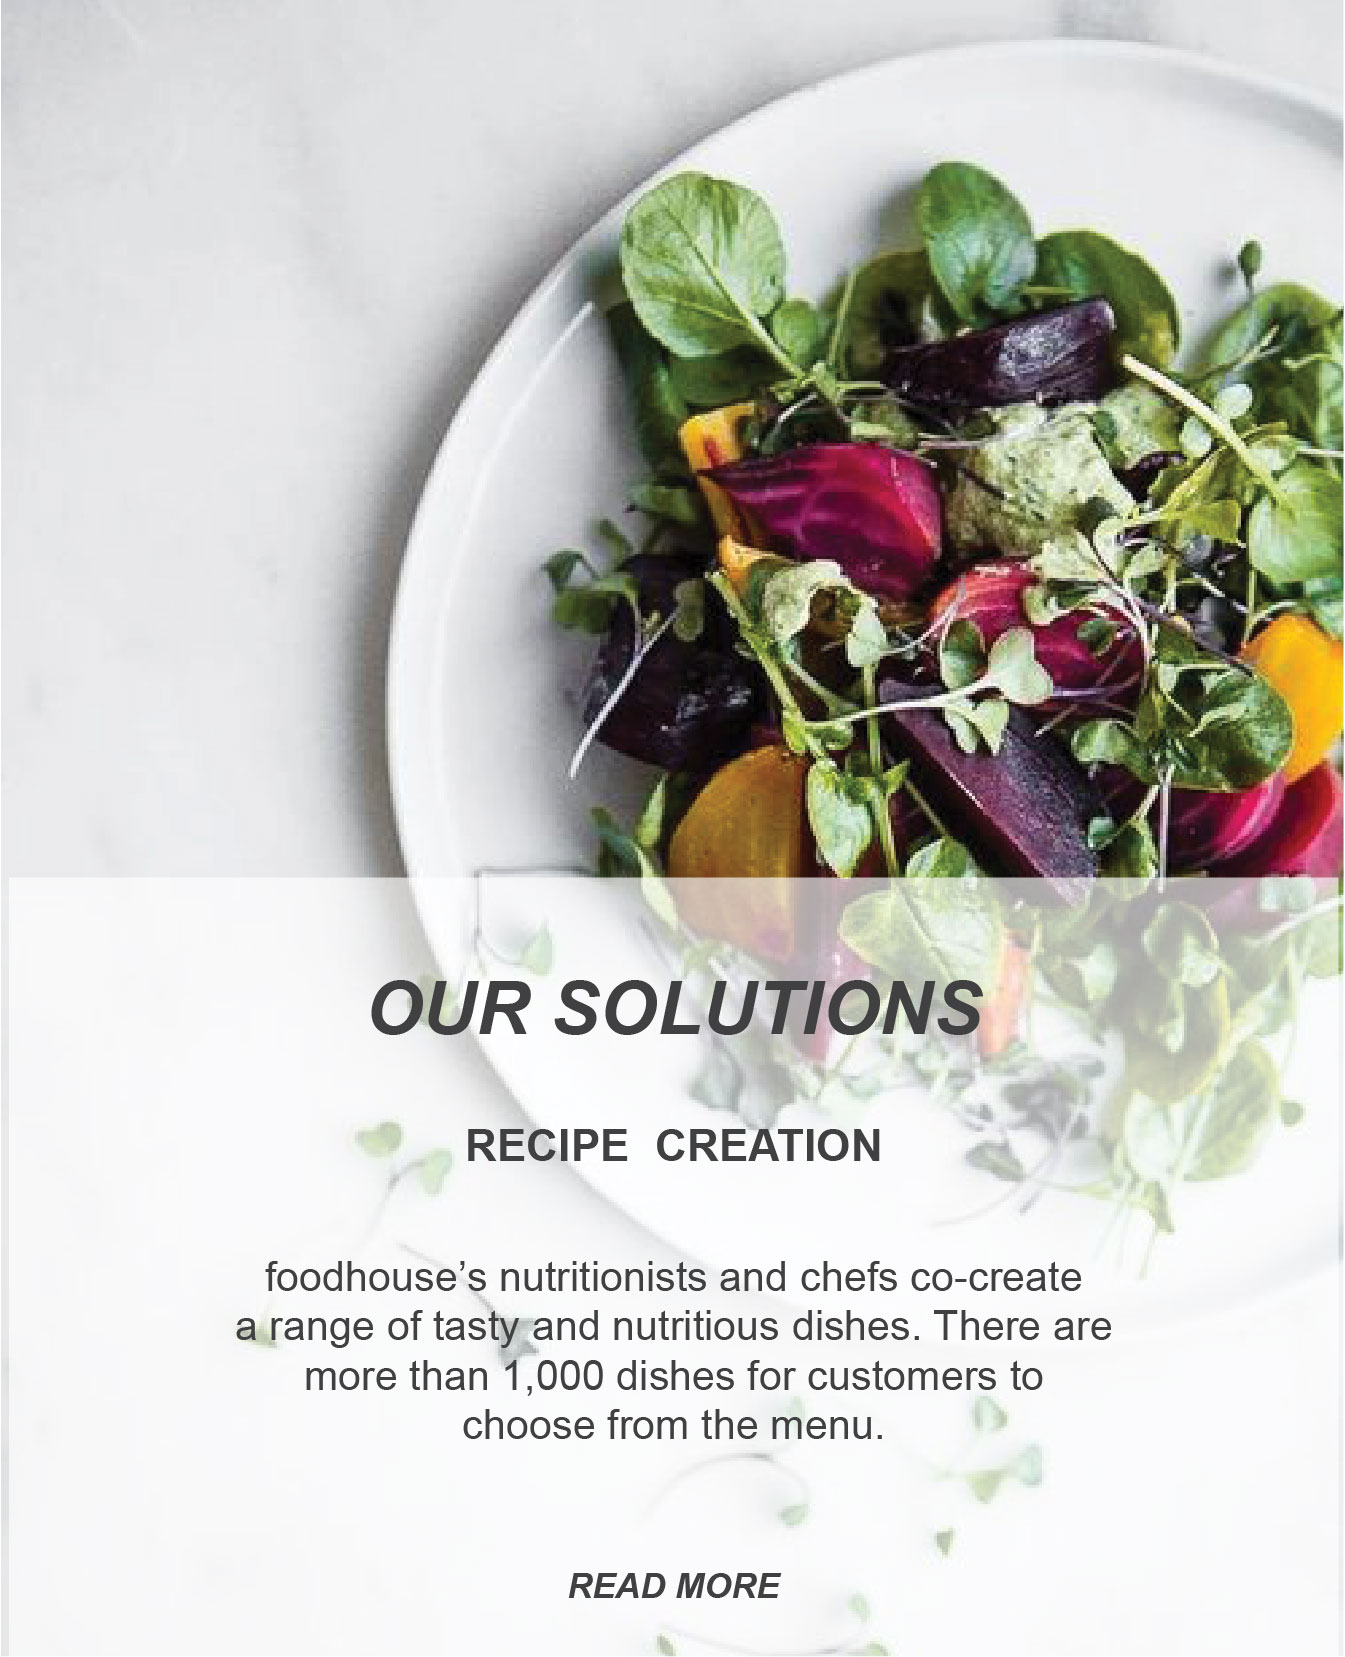 recipe creation solution from nutritionists and chefs that co-create a range of tasty and nutritious dishes by food house catering service - foodhouse